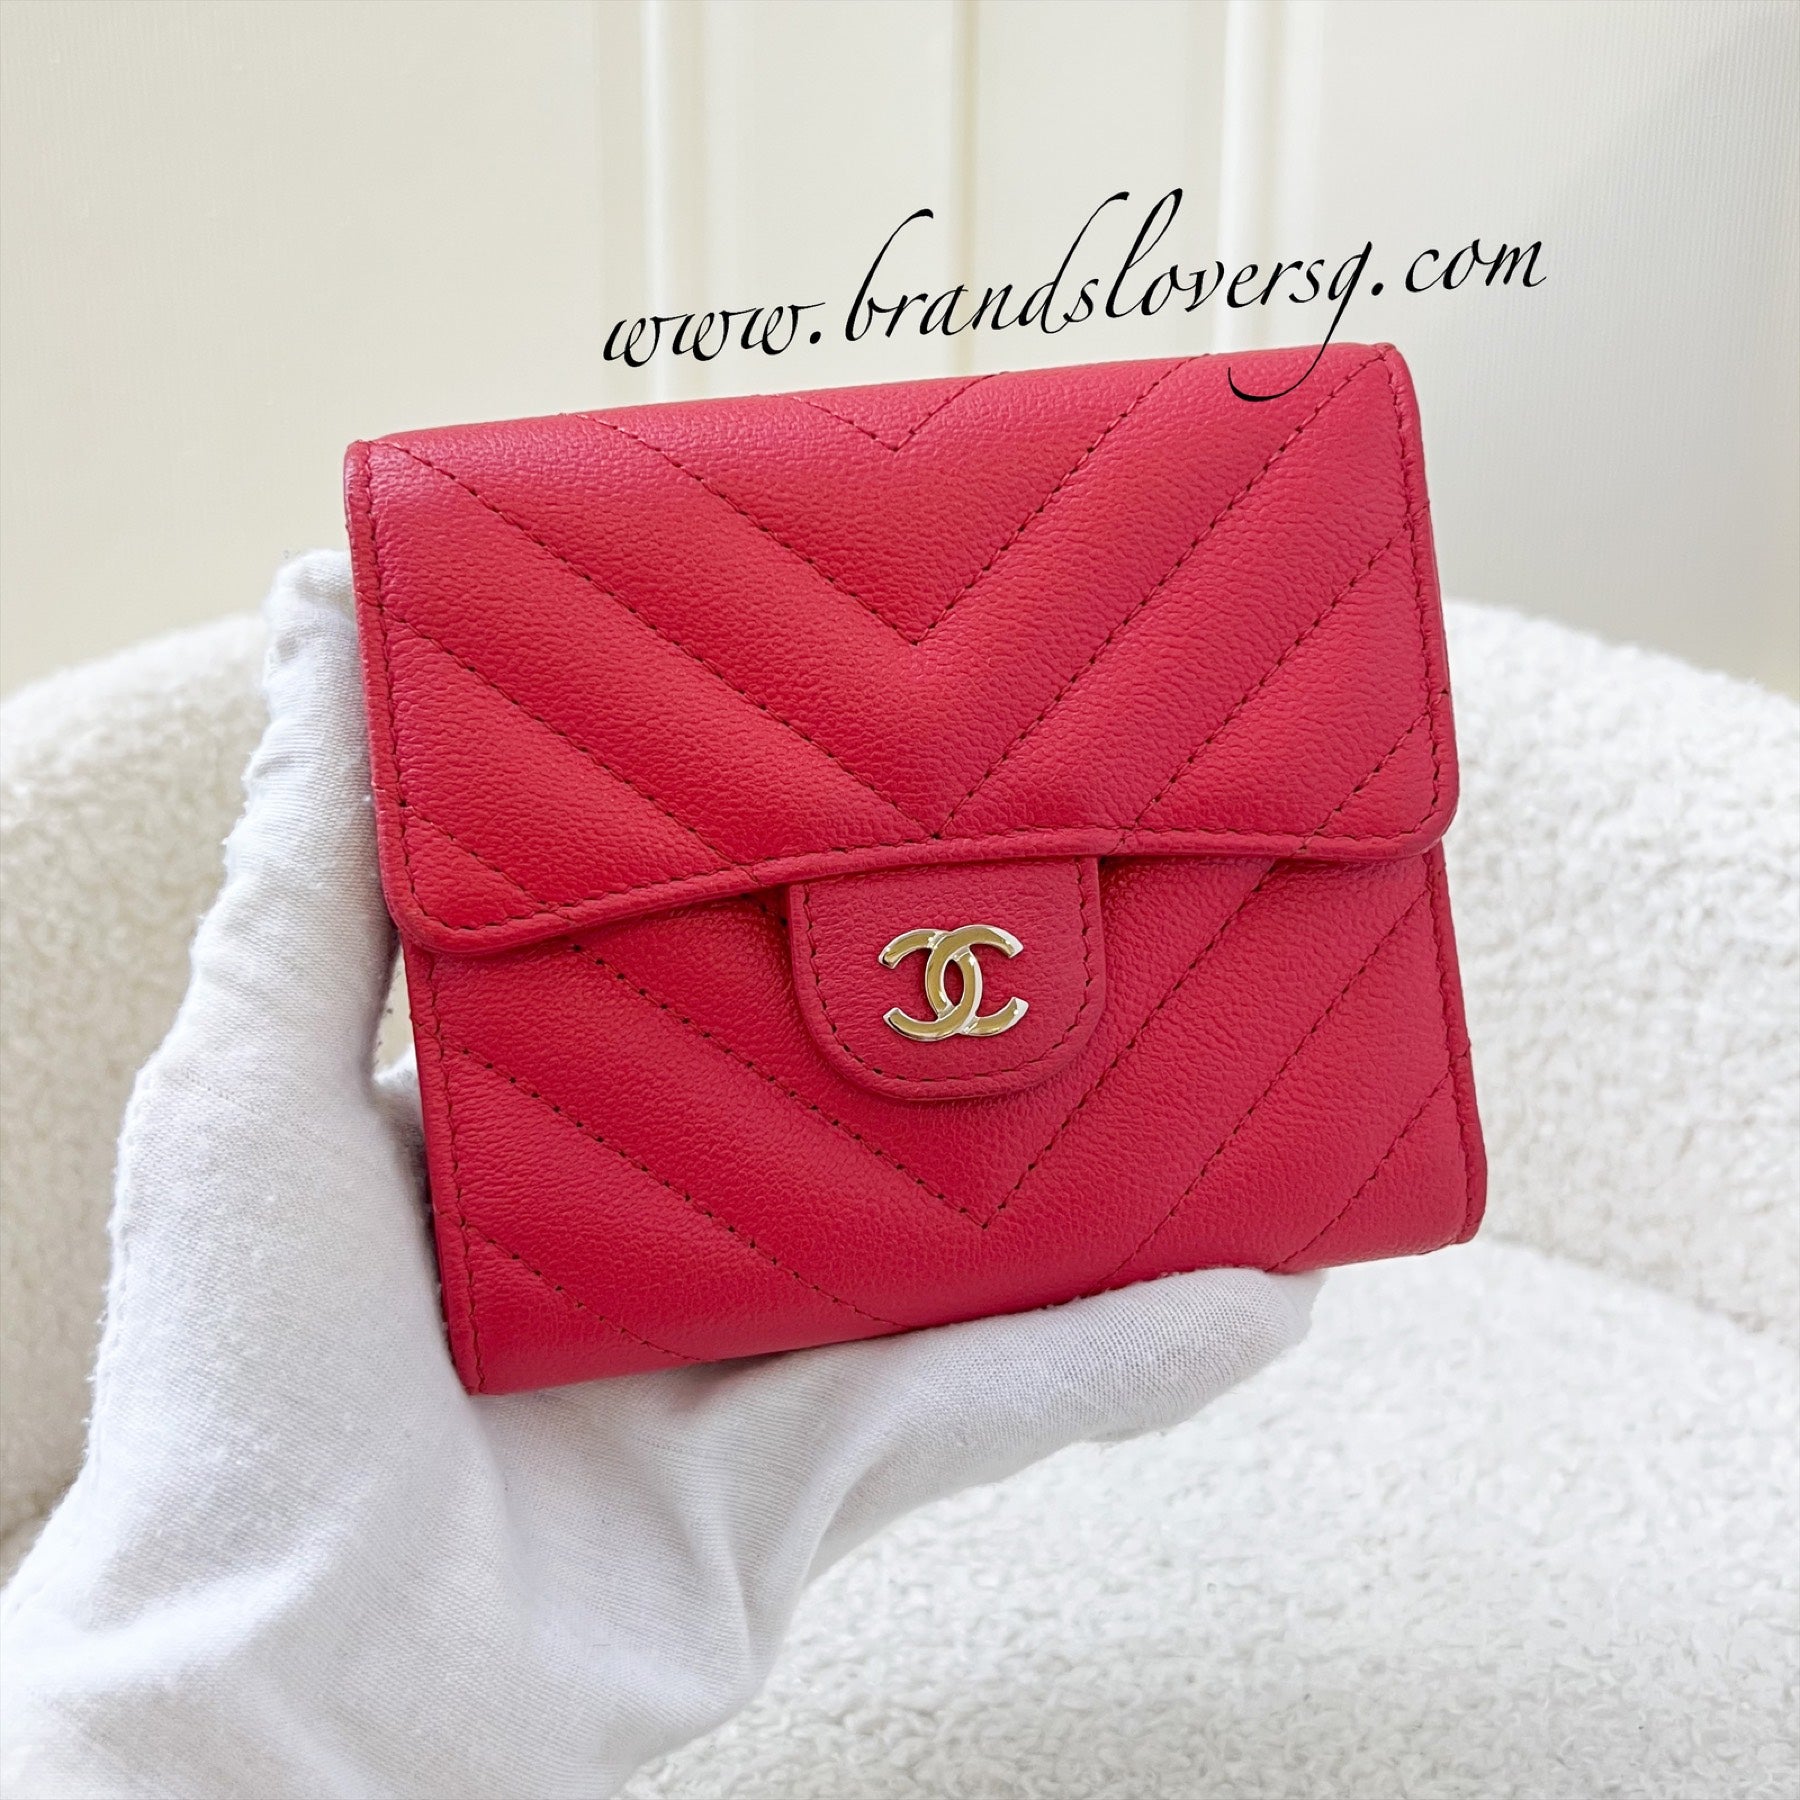 Chanel Classic Compact Trifold Wallet in Chevron Red Caviar and SHW –  Brands Lover